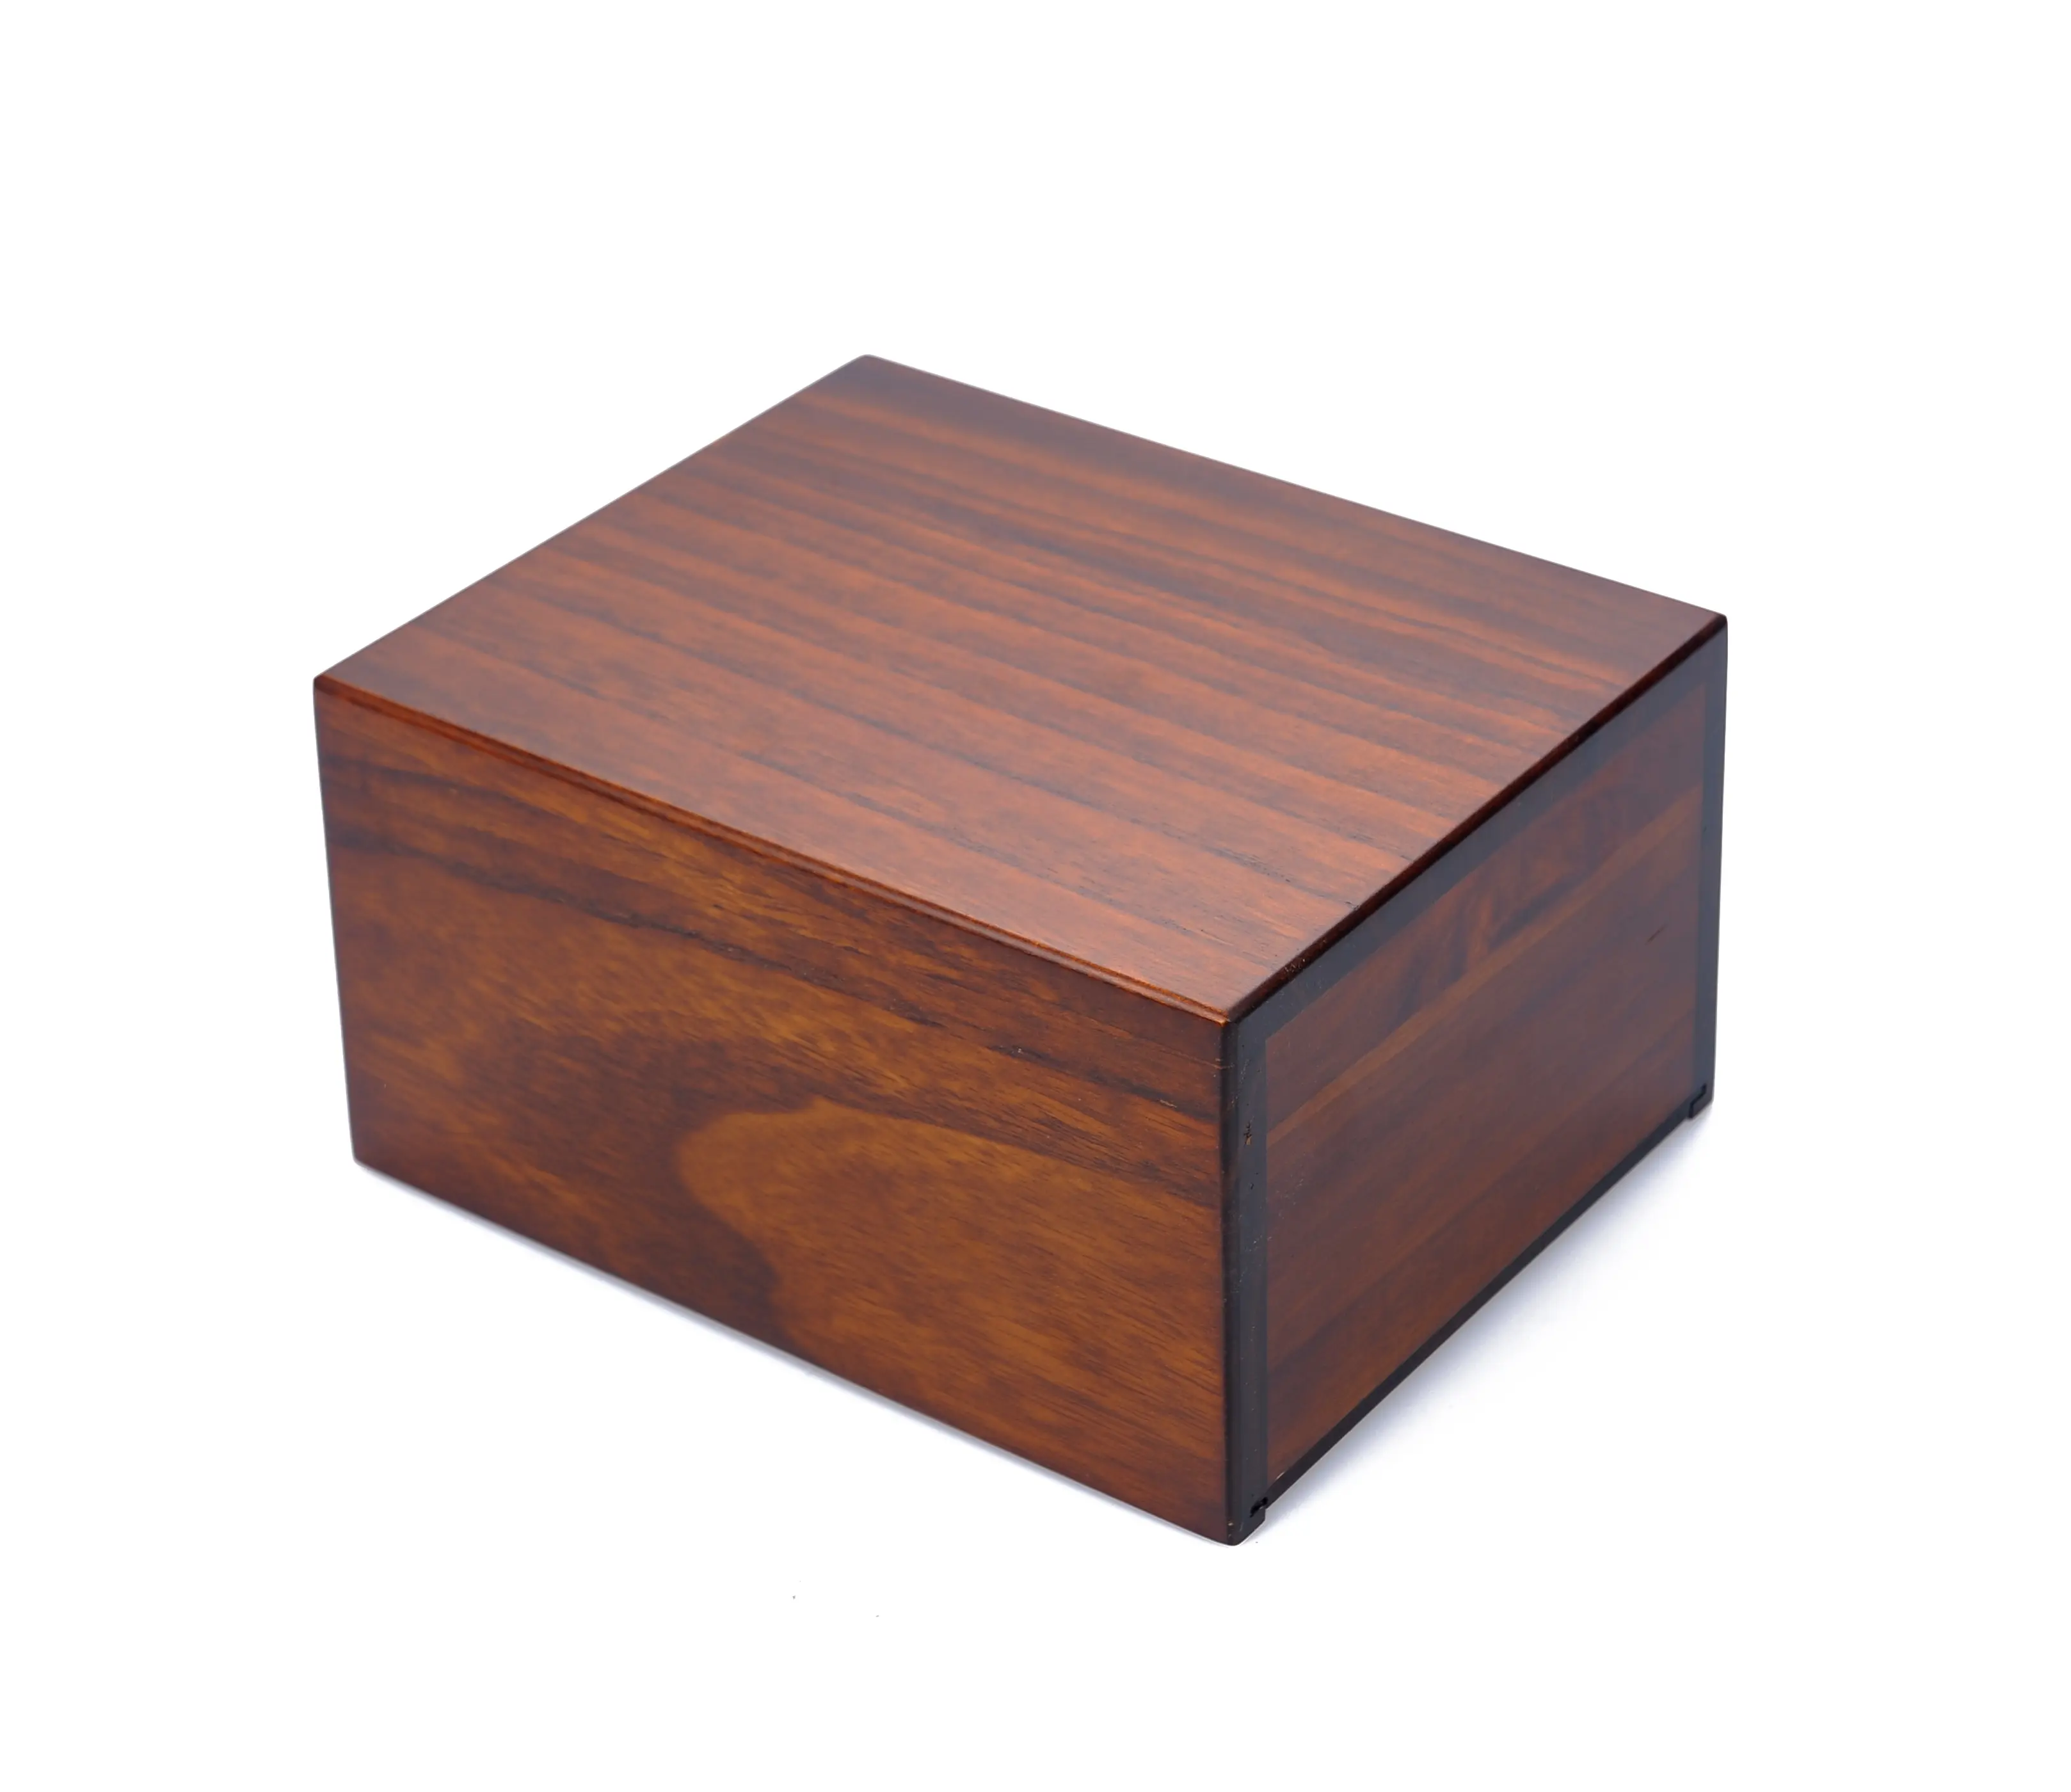 Urns For Pets B051 Wholesale Funeral Cherry Pet Urn For Ashes Urnas Para Mascotas Wooden Urn Box